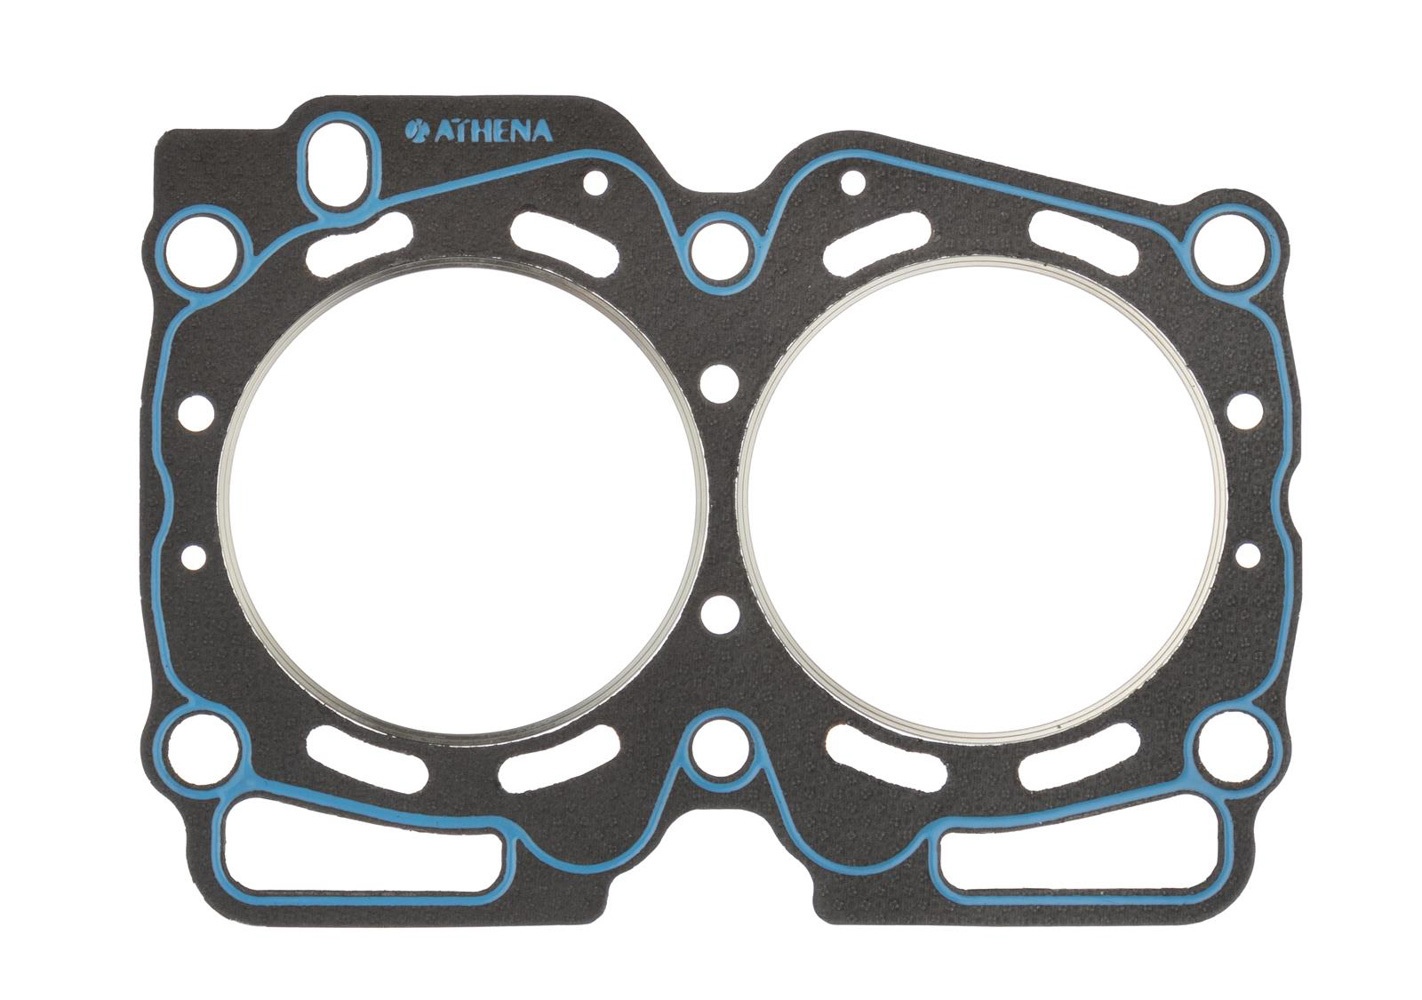 SCE Gaskets CR330041 - Cylinder Head Gasket, Vulcan Cut Ring, 93.50 mm Bore, 1.20 mm Compression Thickness, Steel Core Laminate, Subaru 4-Cylinder, Each